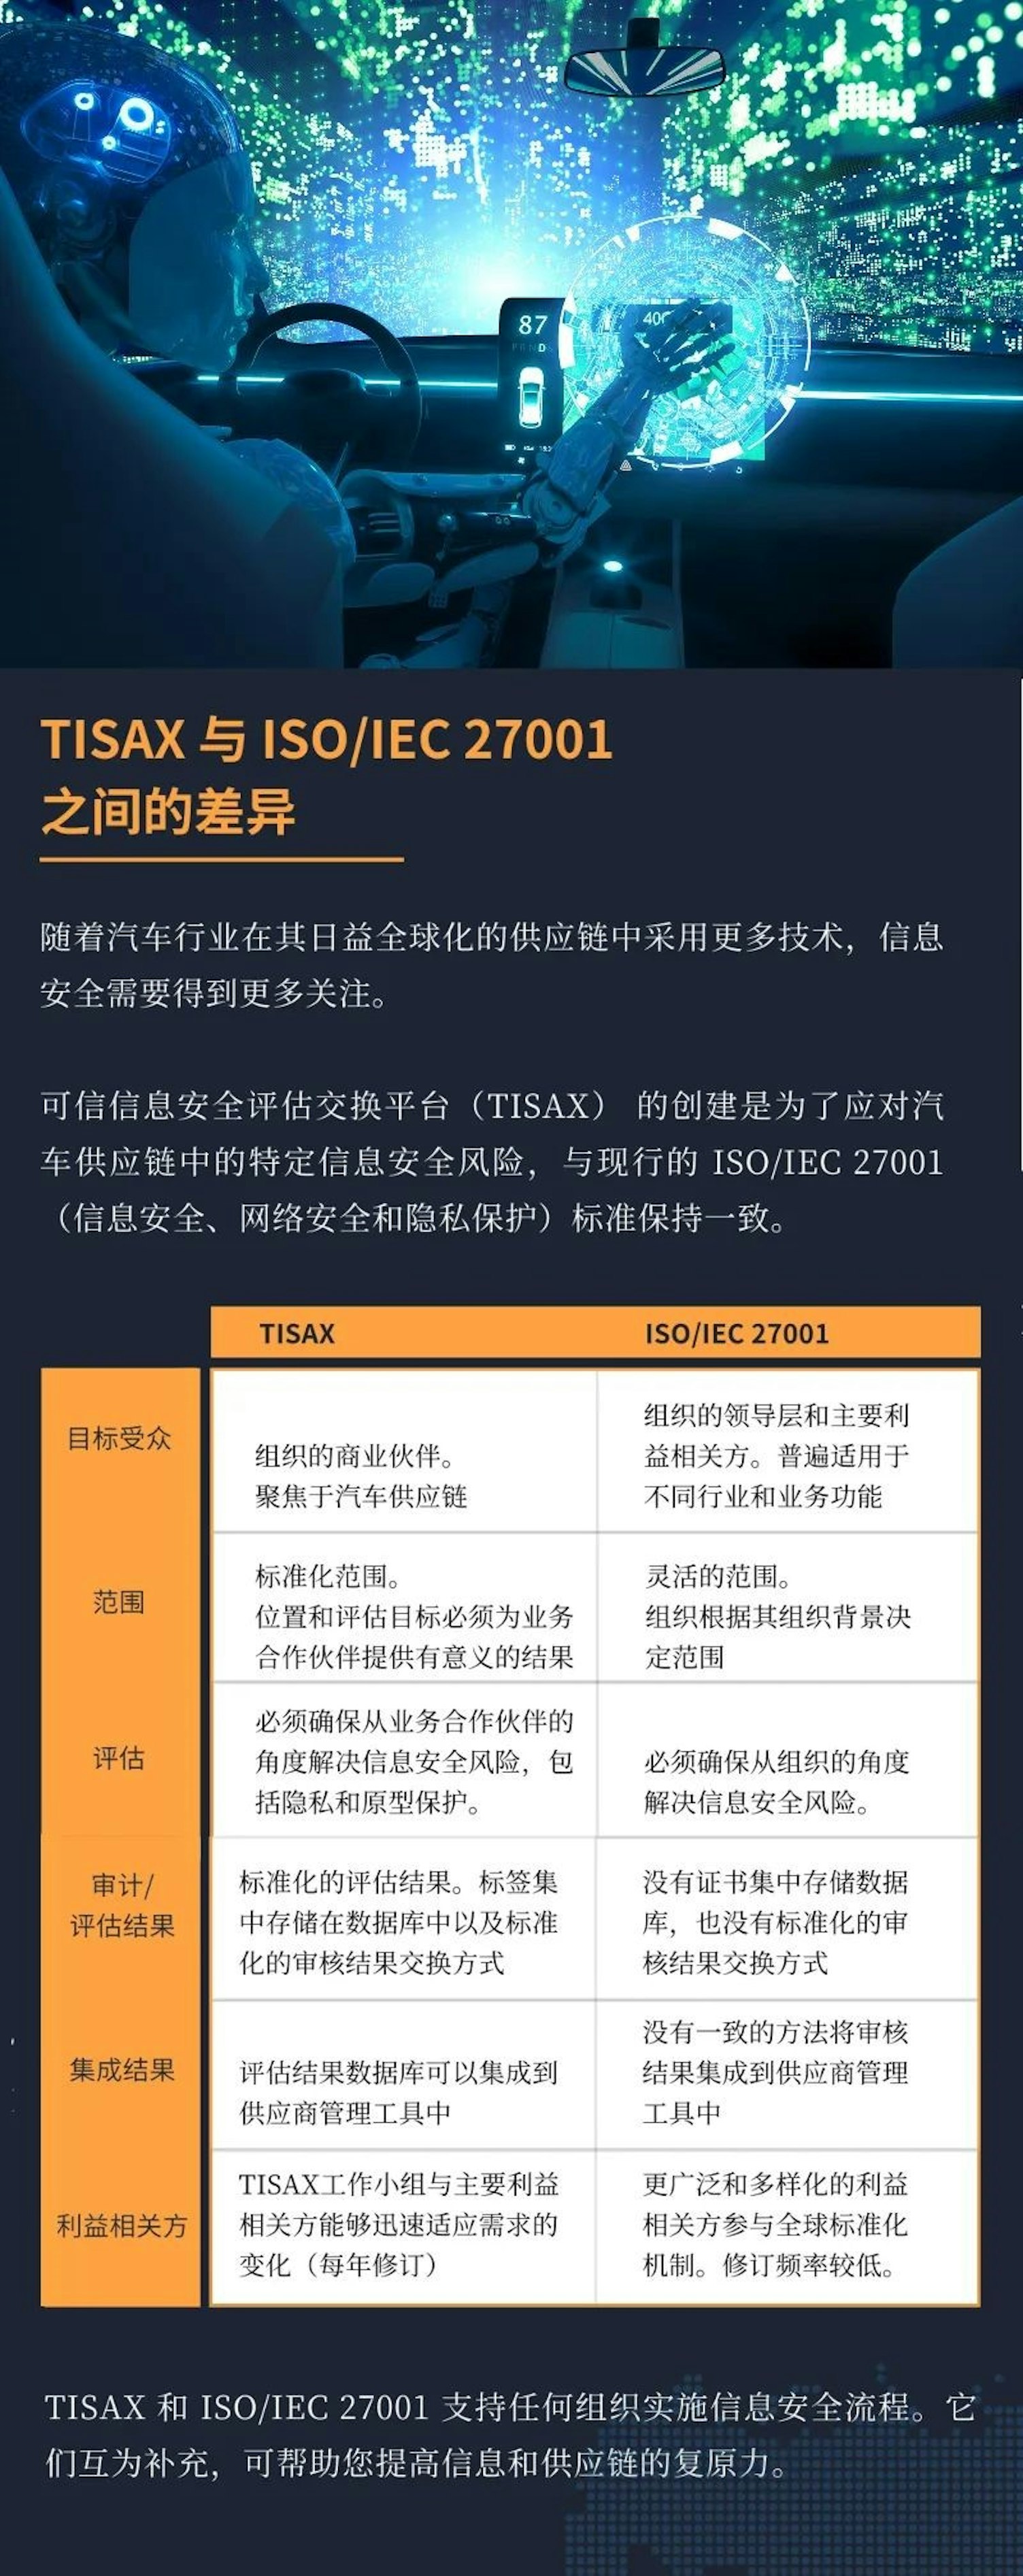  TISAX®与ISO/IEC 27001的区别